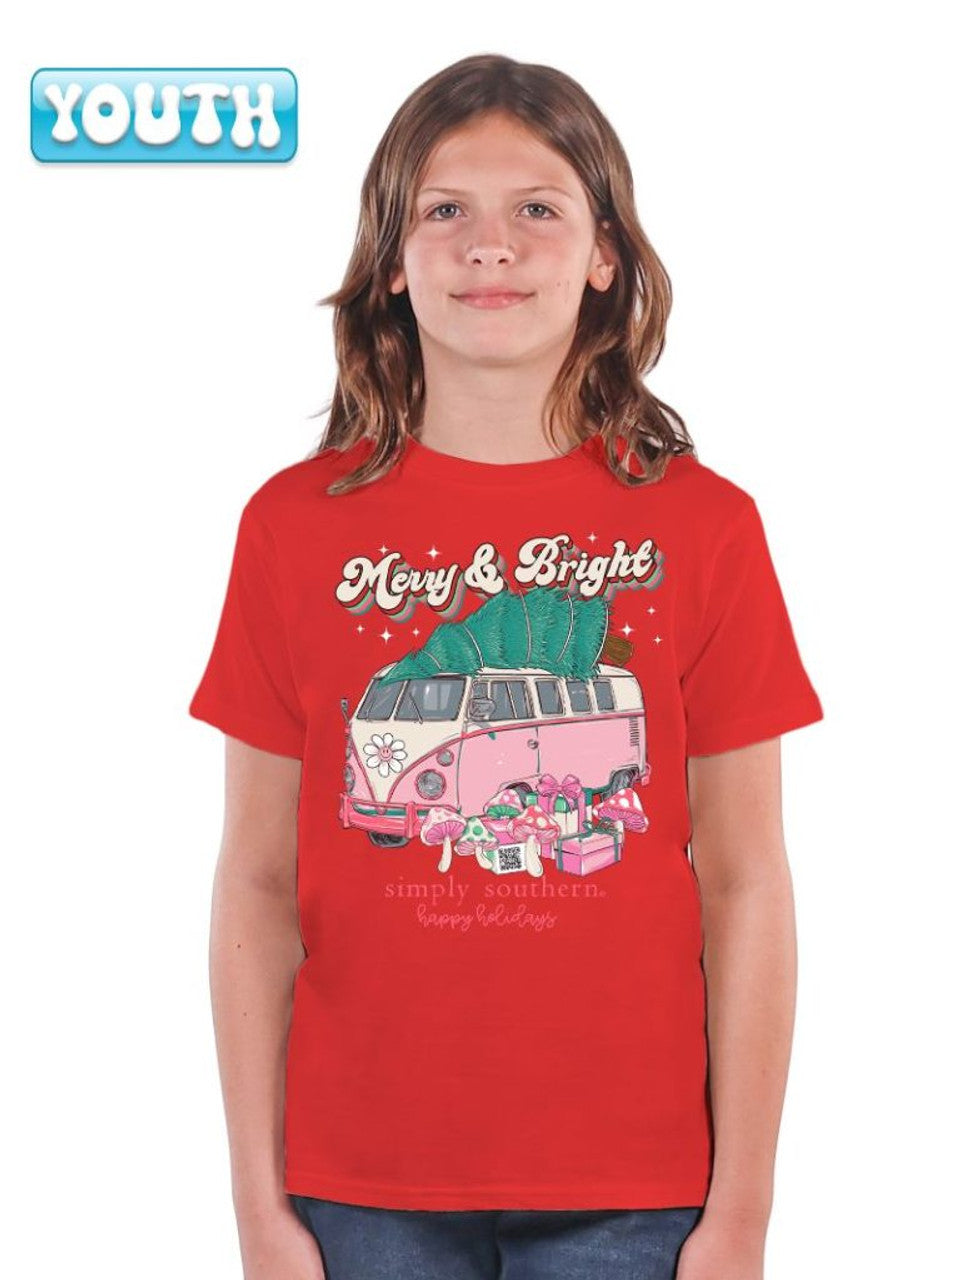 Merry & Bright T-Shirt By Simply Southern- Red